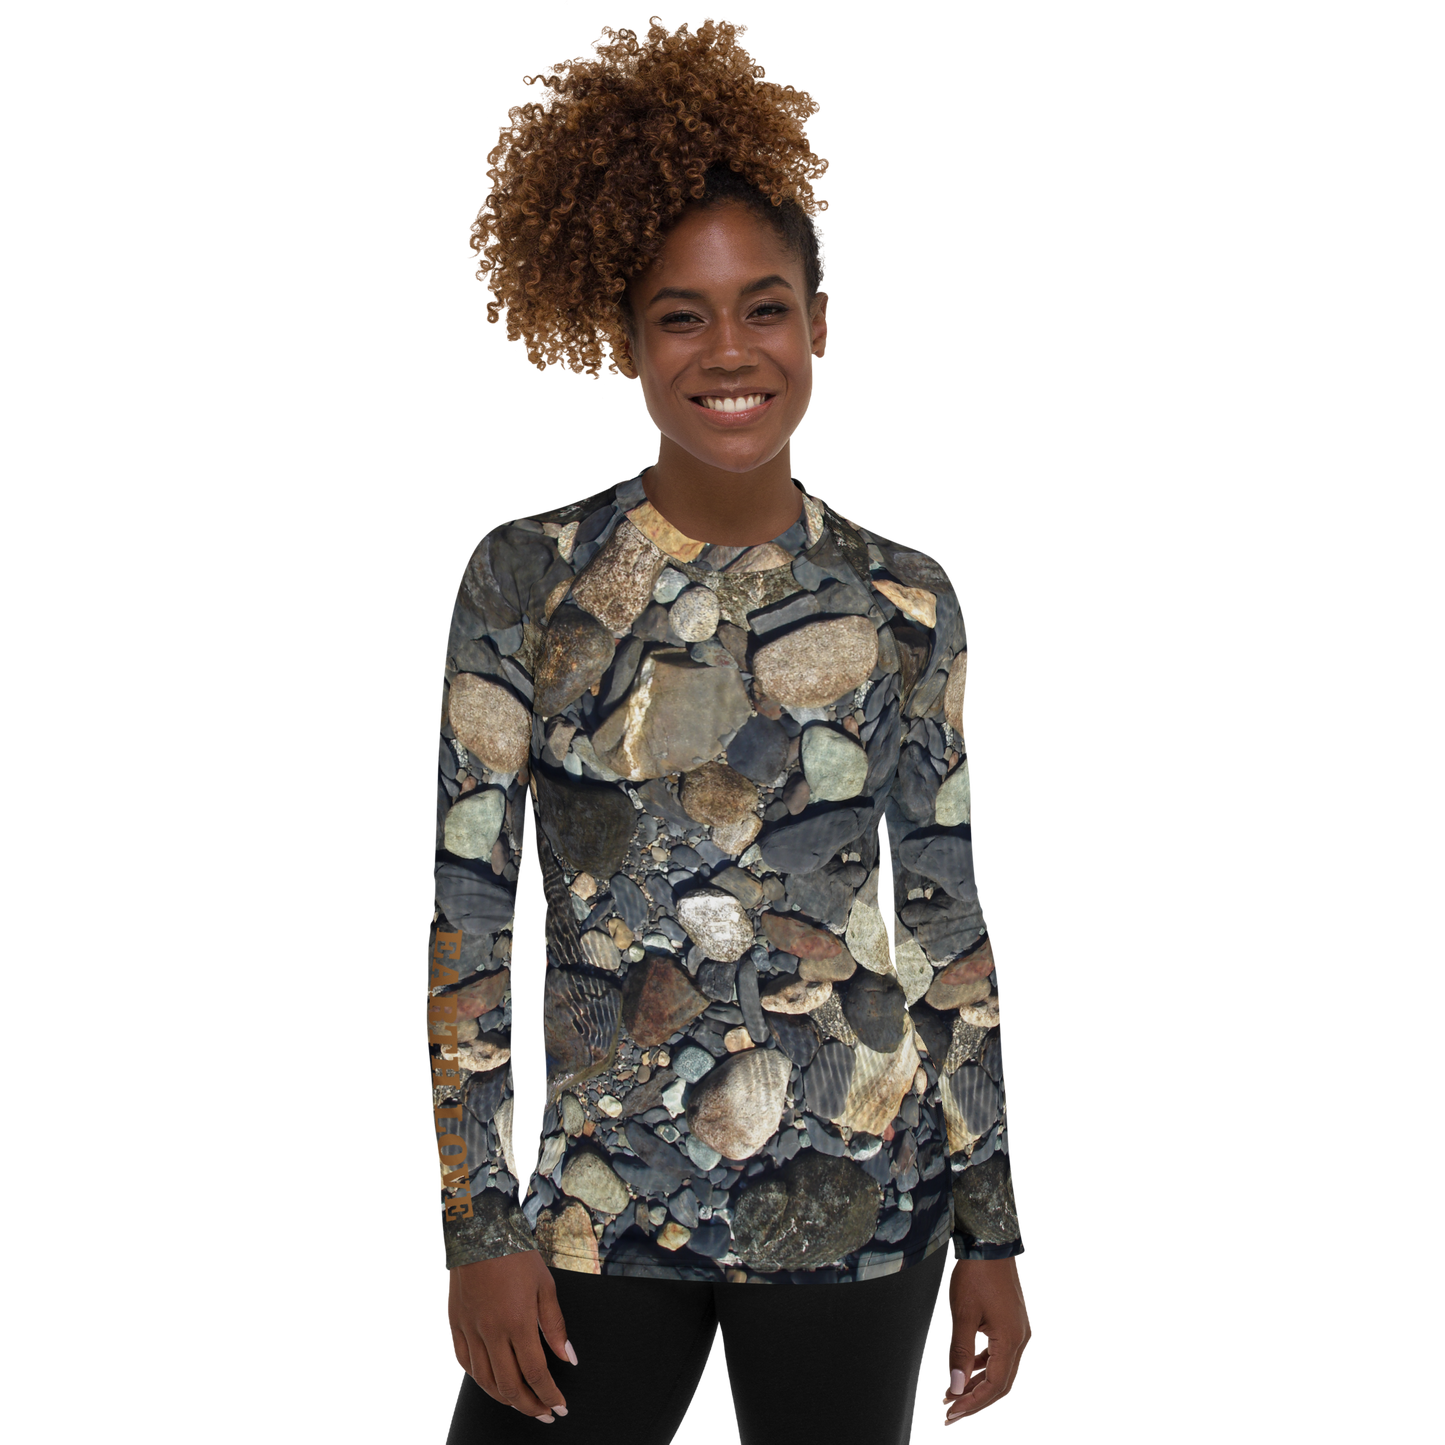 The EARTH LOVE Collection - "Rock Renaissance" Design Luxurious Women's Rash Guard, Sun Protective Clothing, Sports & Fitness Clothing